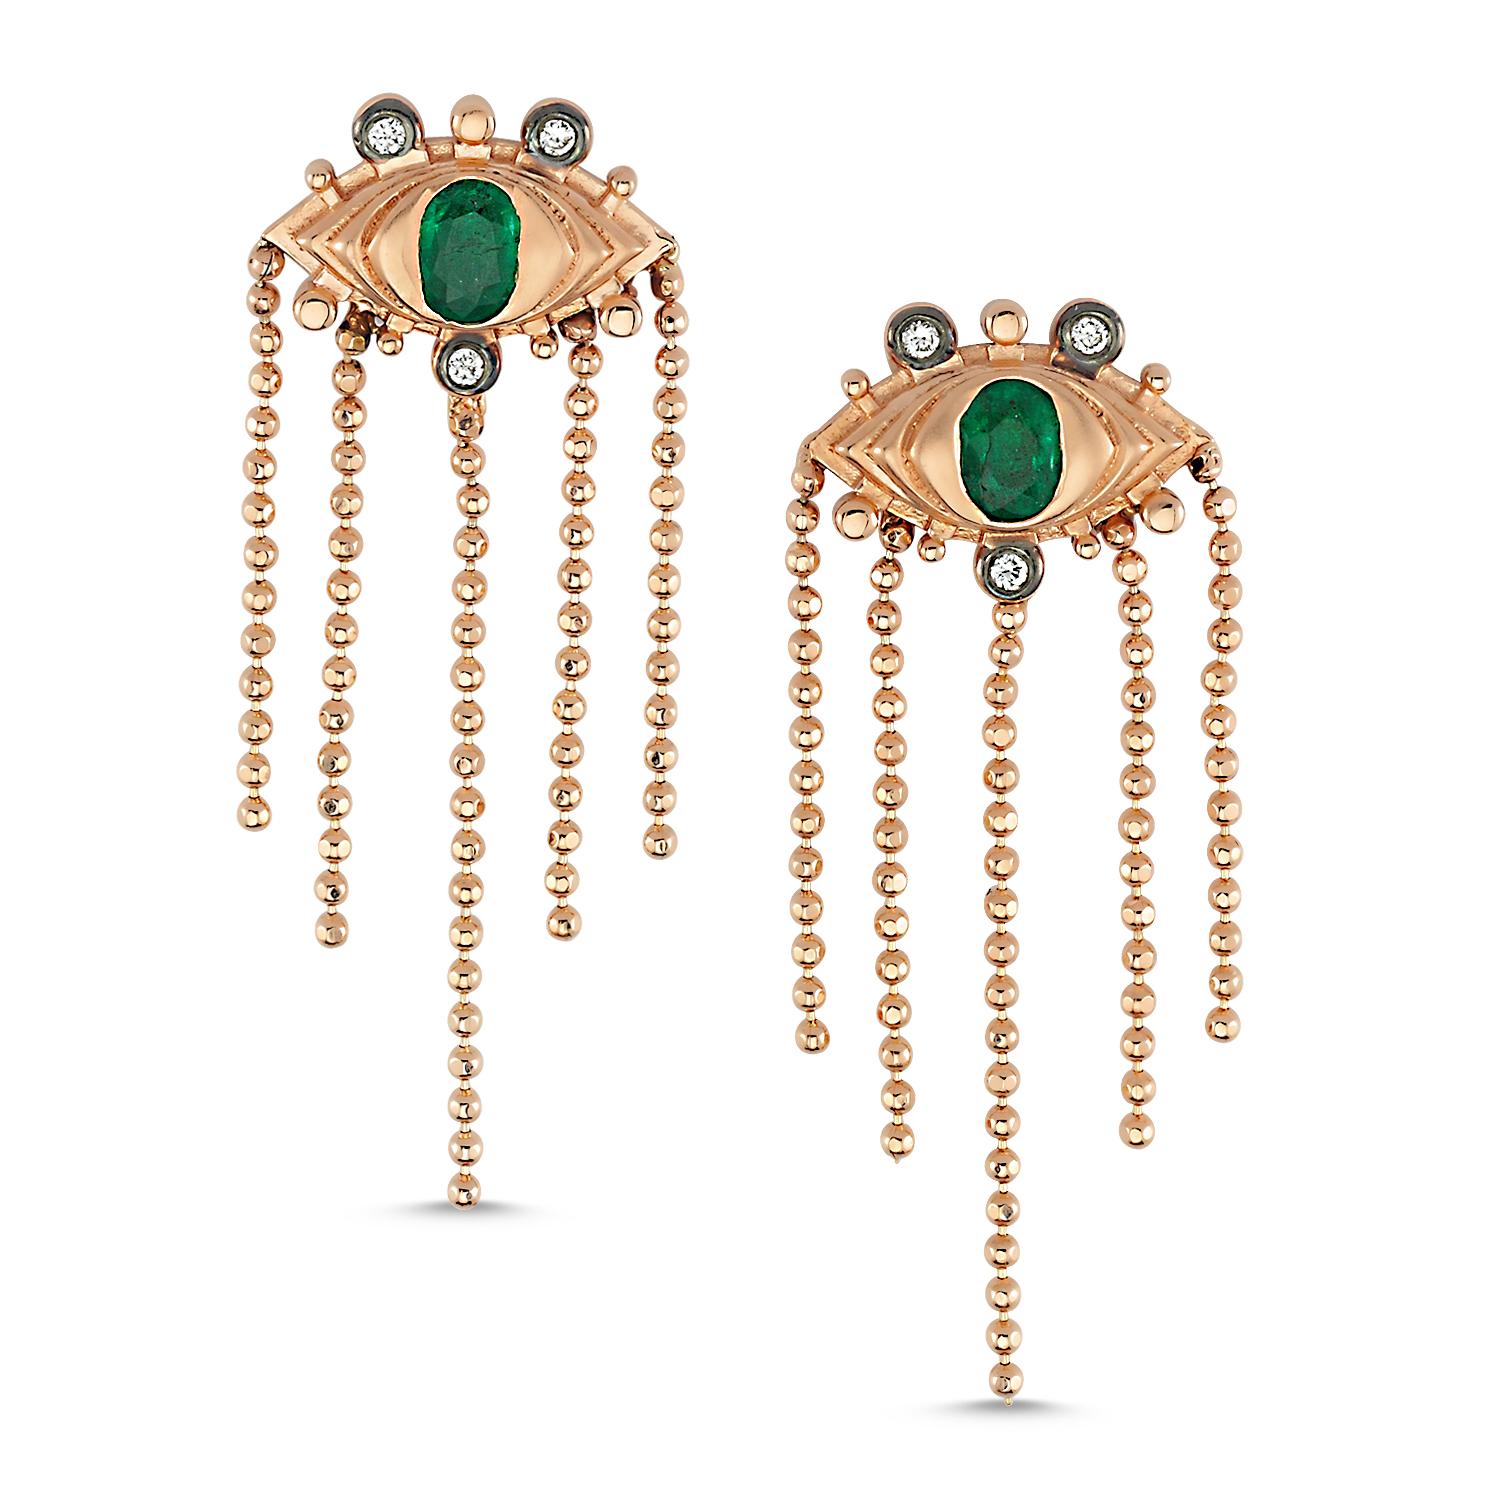 Dragon eye emerald chain earrings with 14k rose gold by Selda Jewellery

Additional Information:-
Collection: Dragon Lady Collection
14k Rose gold
0.04ct White diamond
0.3ct Emerald
Length 3cm